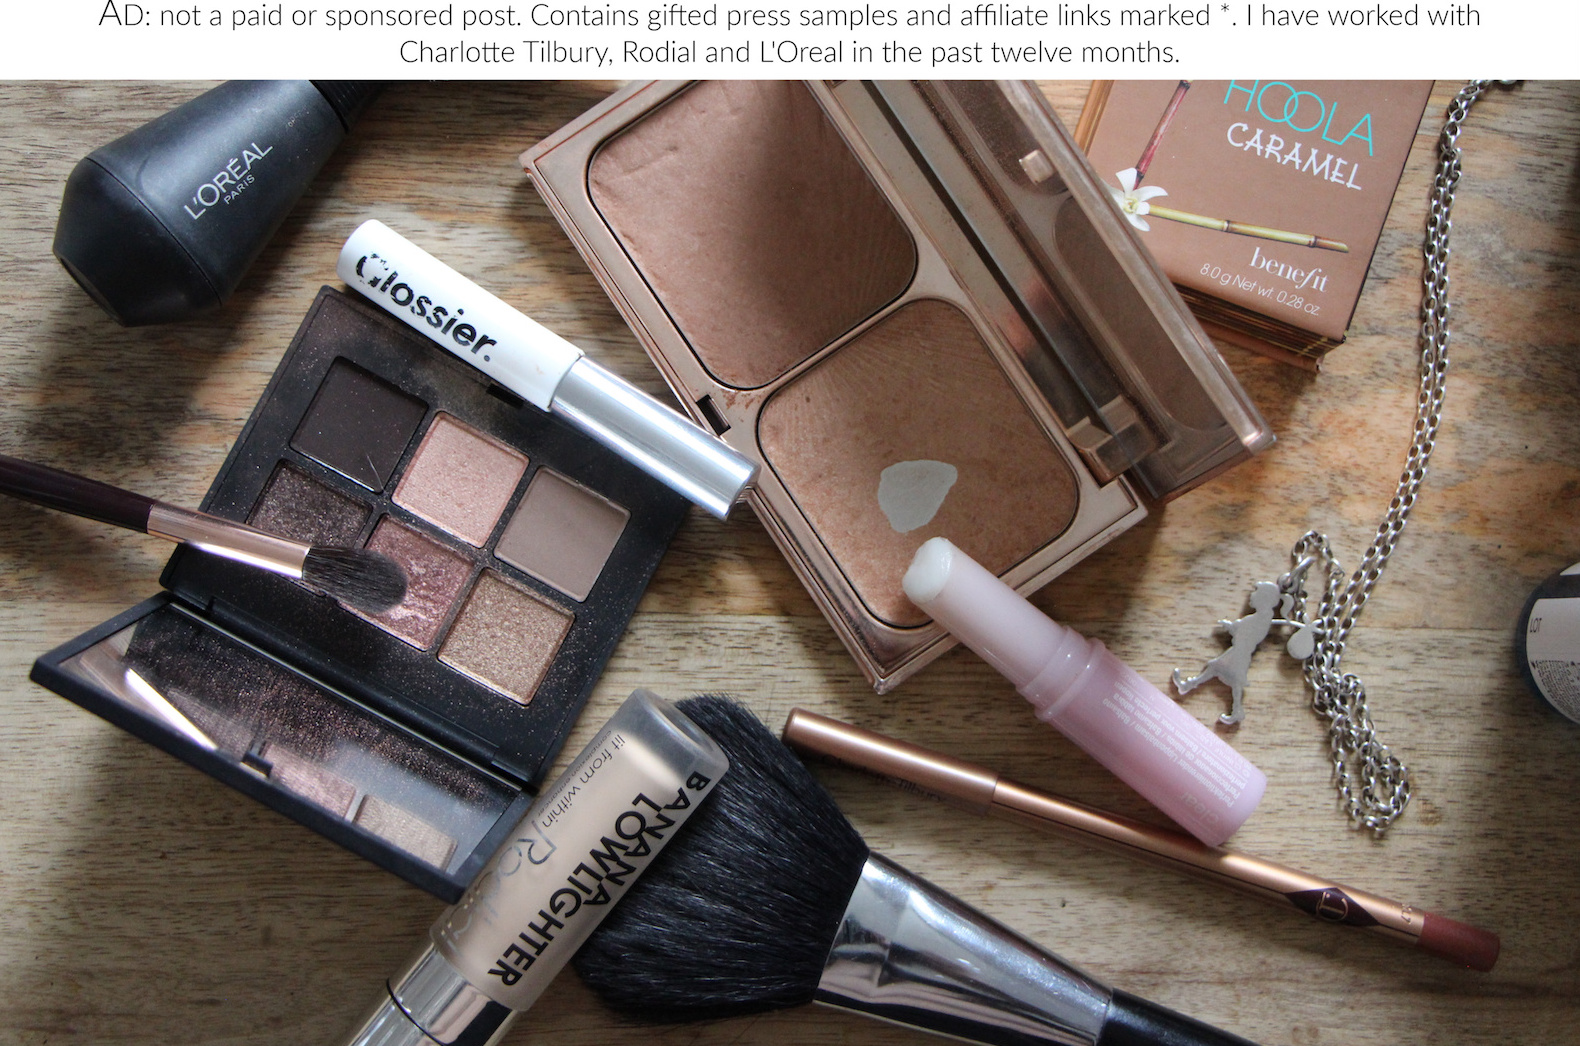 What’s In My Makeup Bag" The Time Capsule